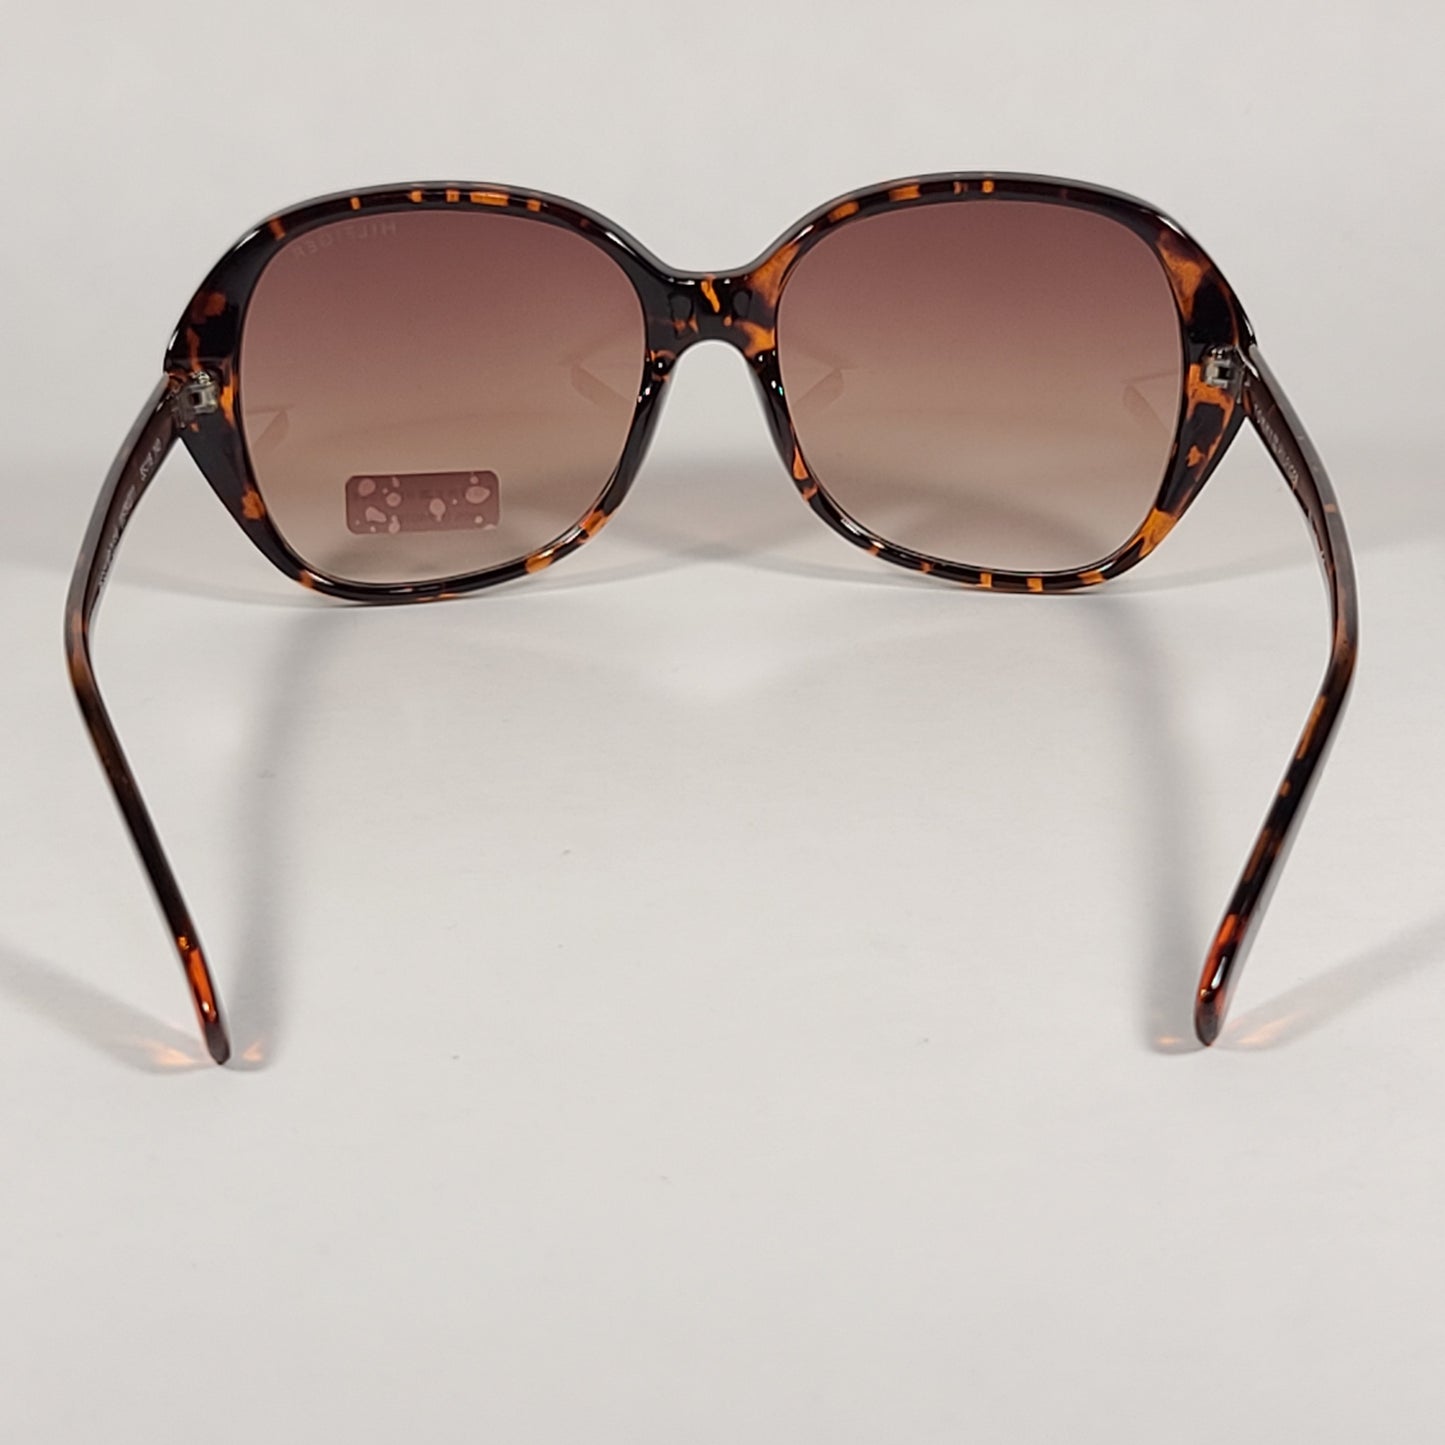 Tommy Hilfiger Peggy Oval Sunglasses Brown Tortoise Gradient Lens PEGGY WP OL514 - Sunglasses